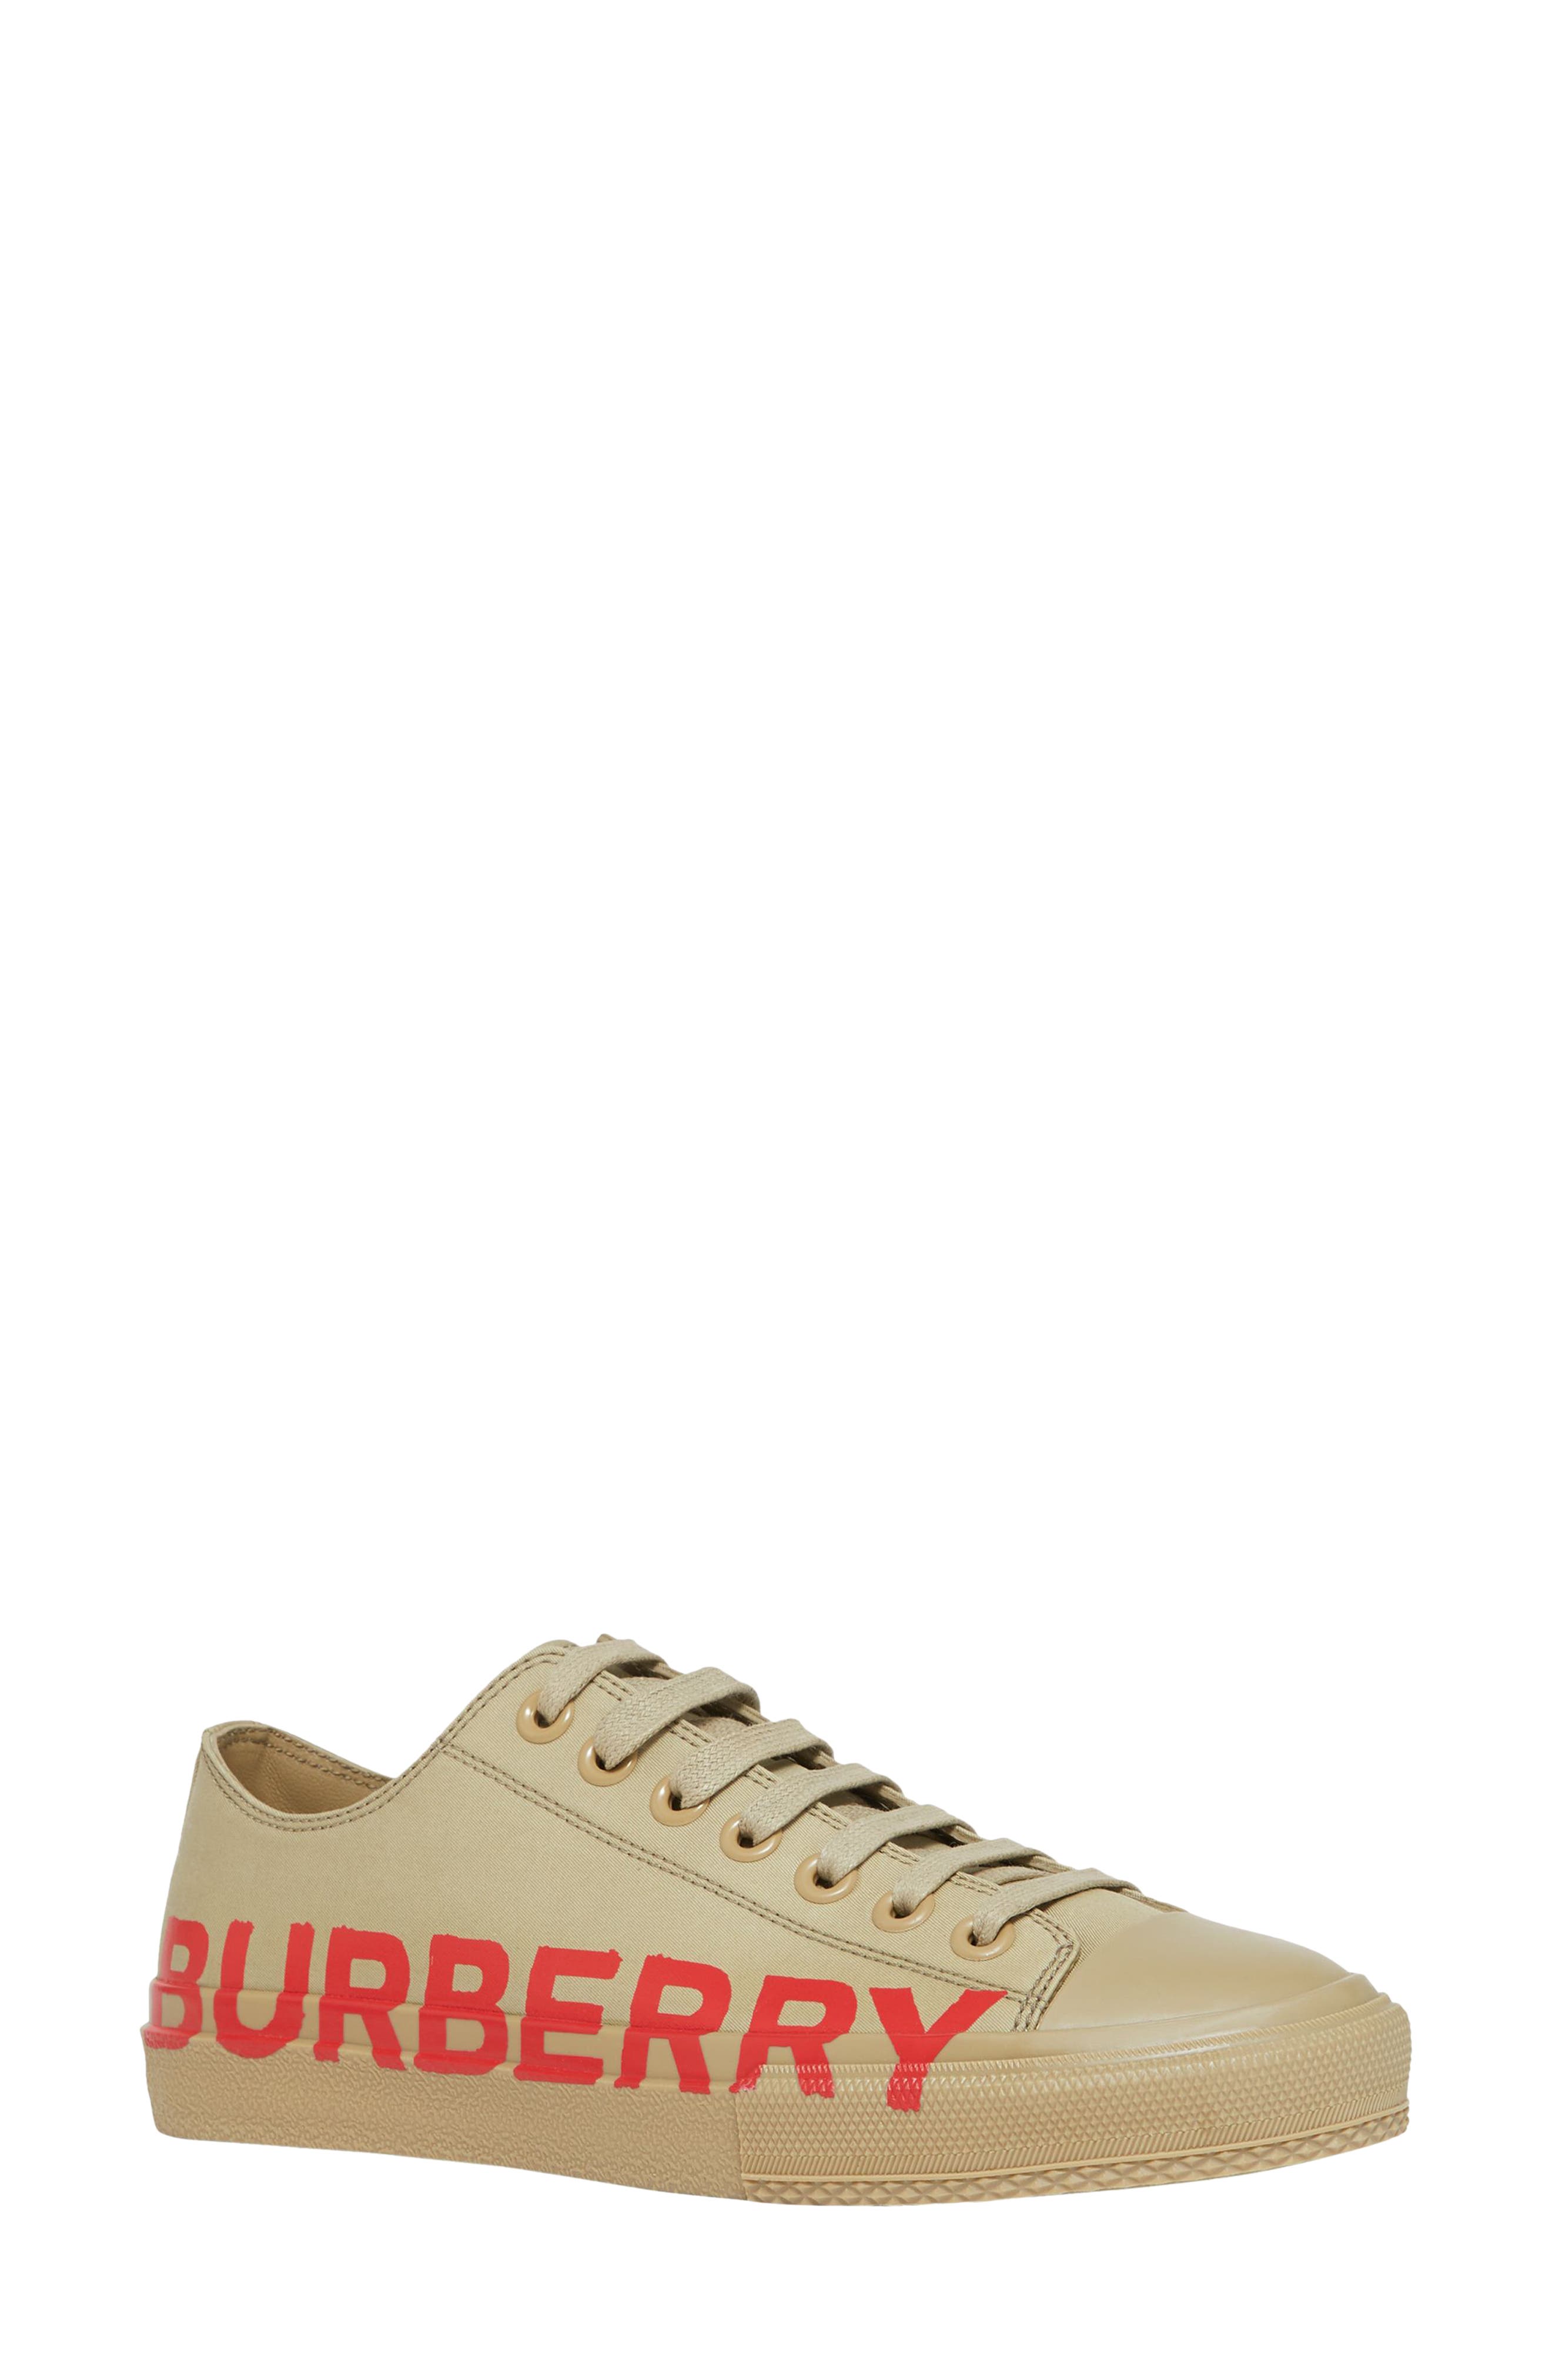 burberry inspired shoes